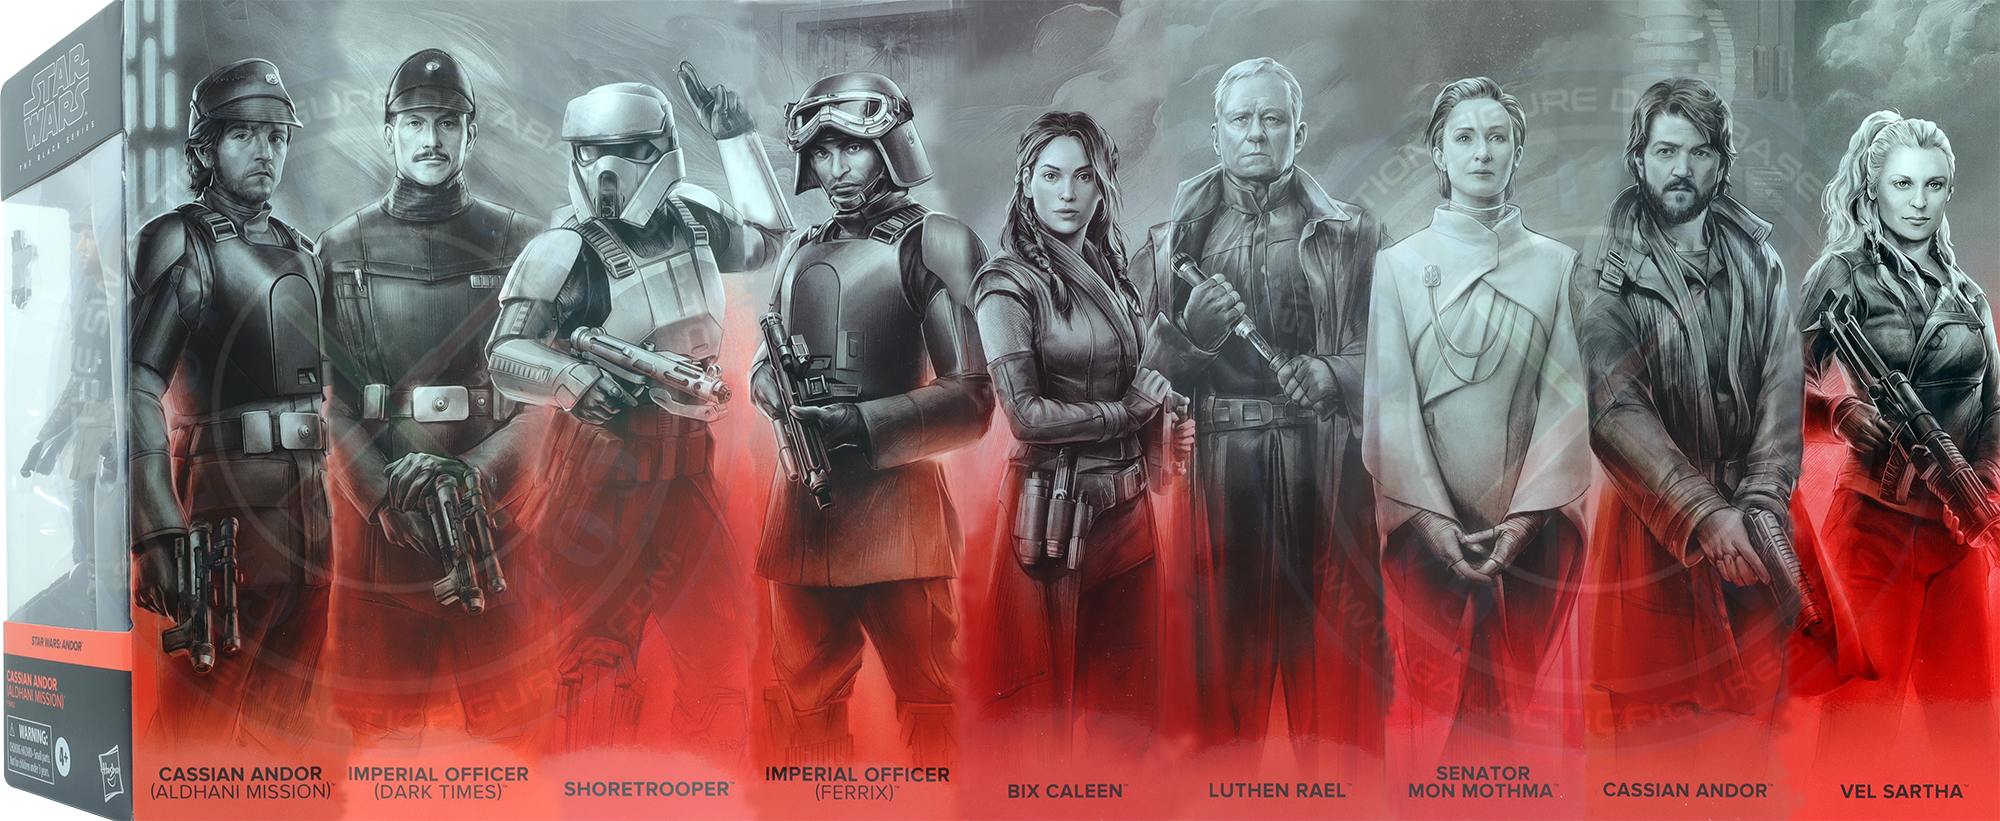 Imperial Officer as part of the Black Series Mural